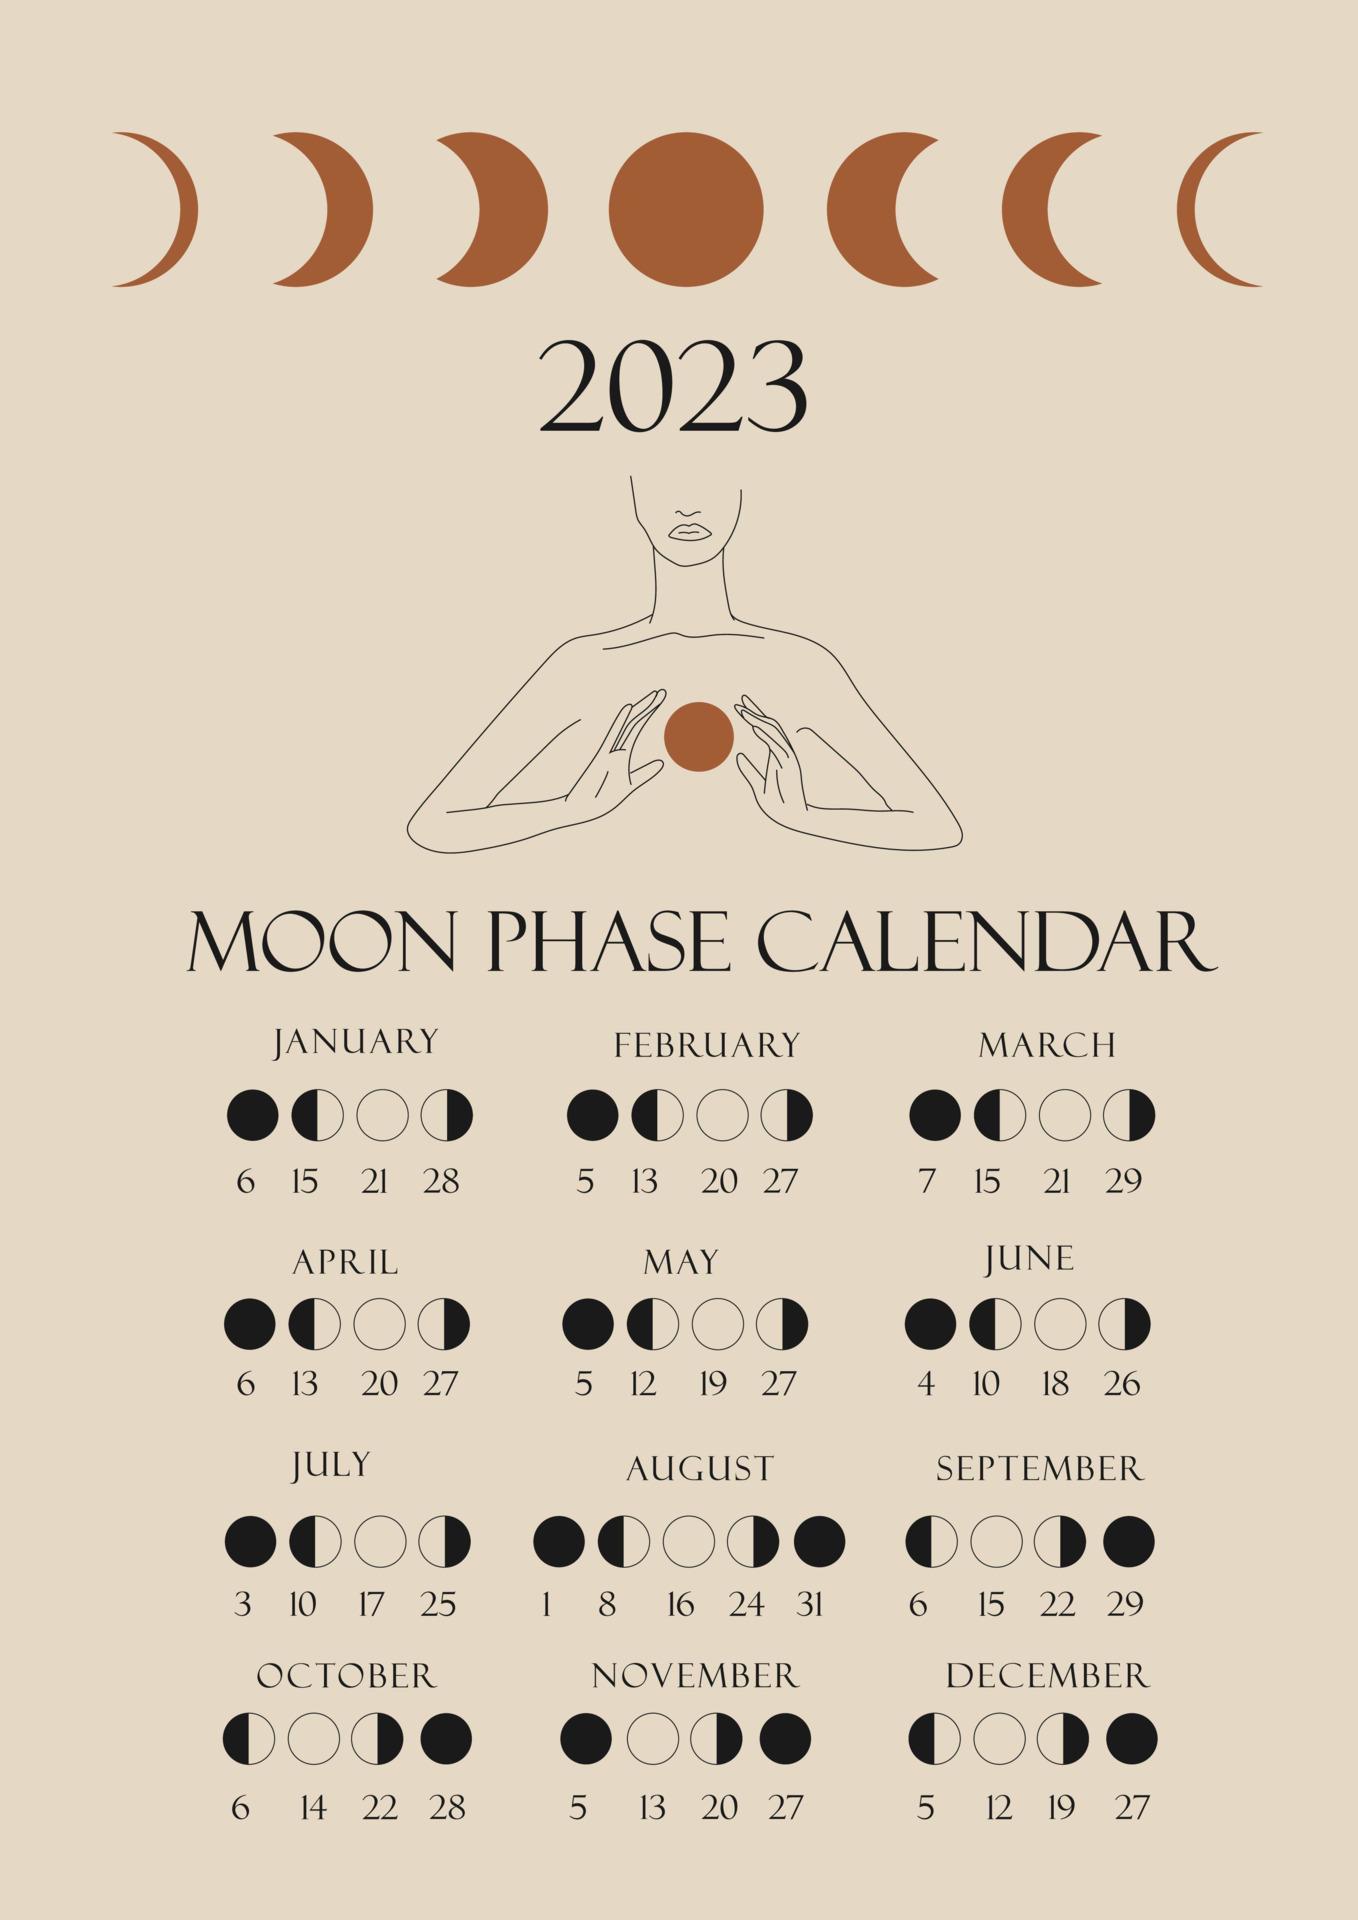 Moon phases calendar 2023 with a girl line. Waning gibbous, Waxing